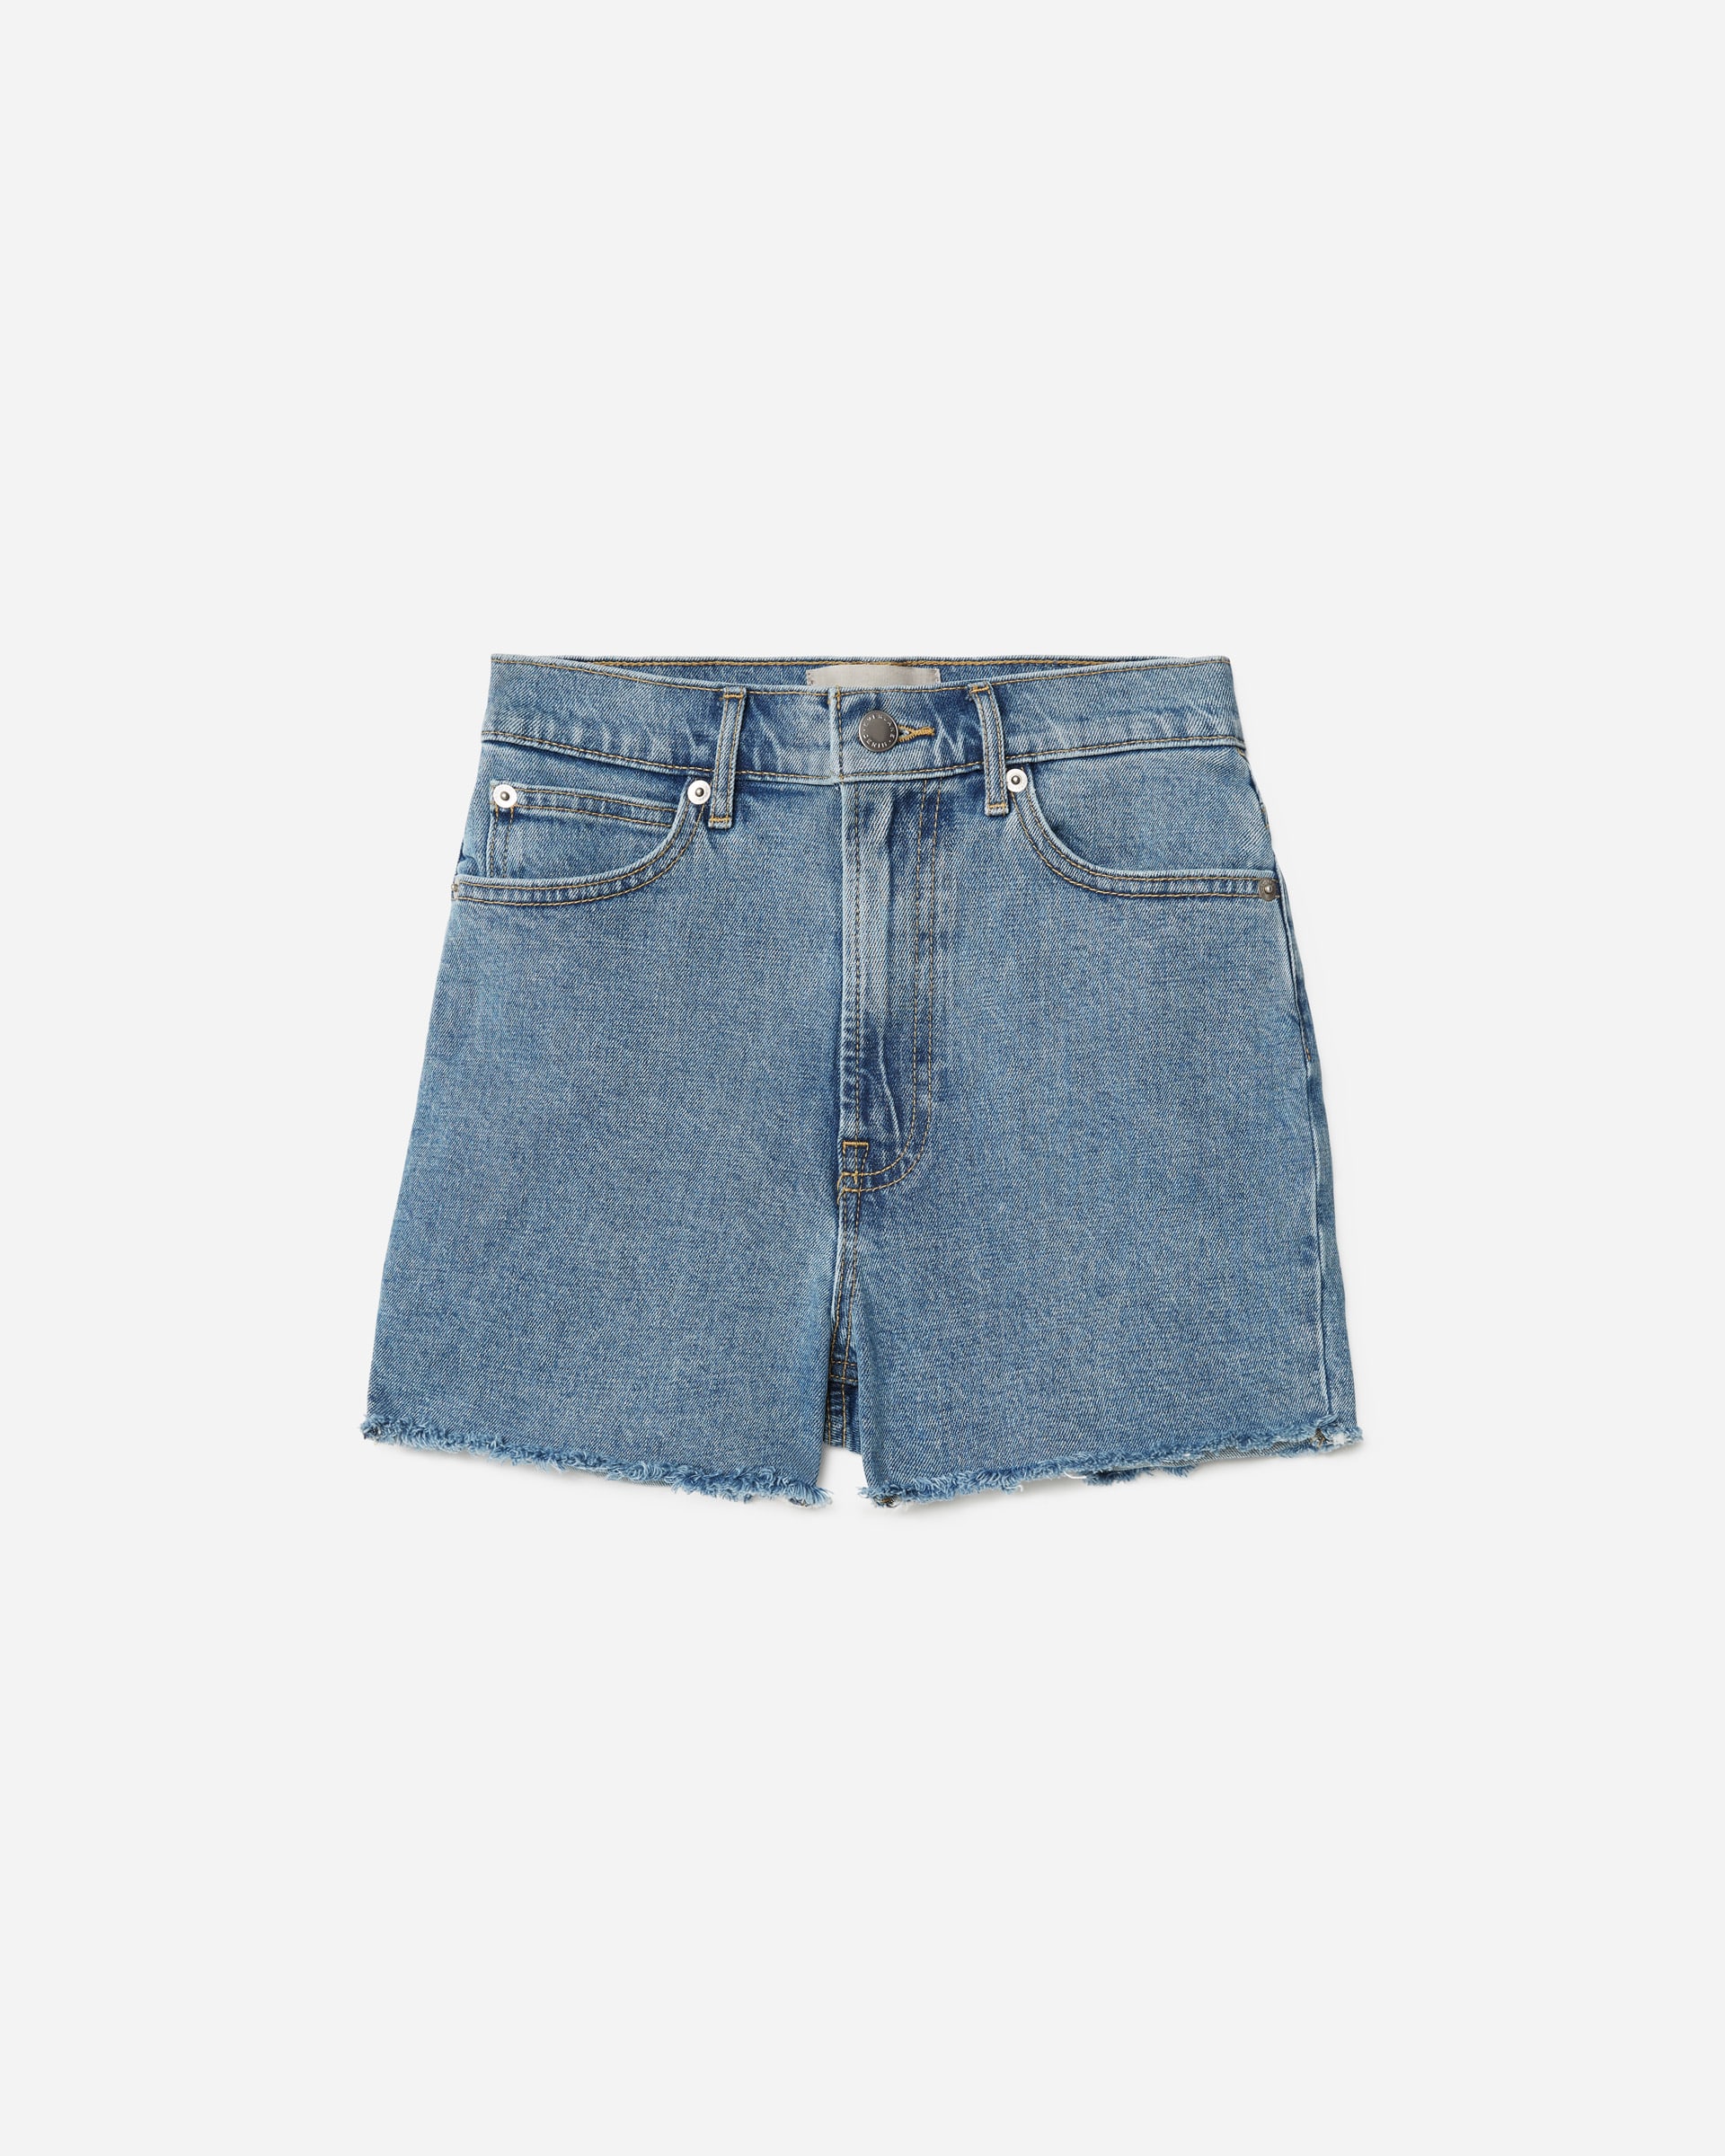 The Way-High Jean Short Washed Blue – Everlane